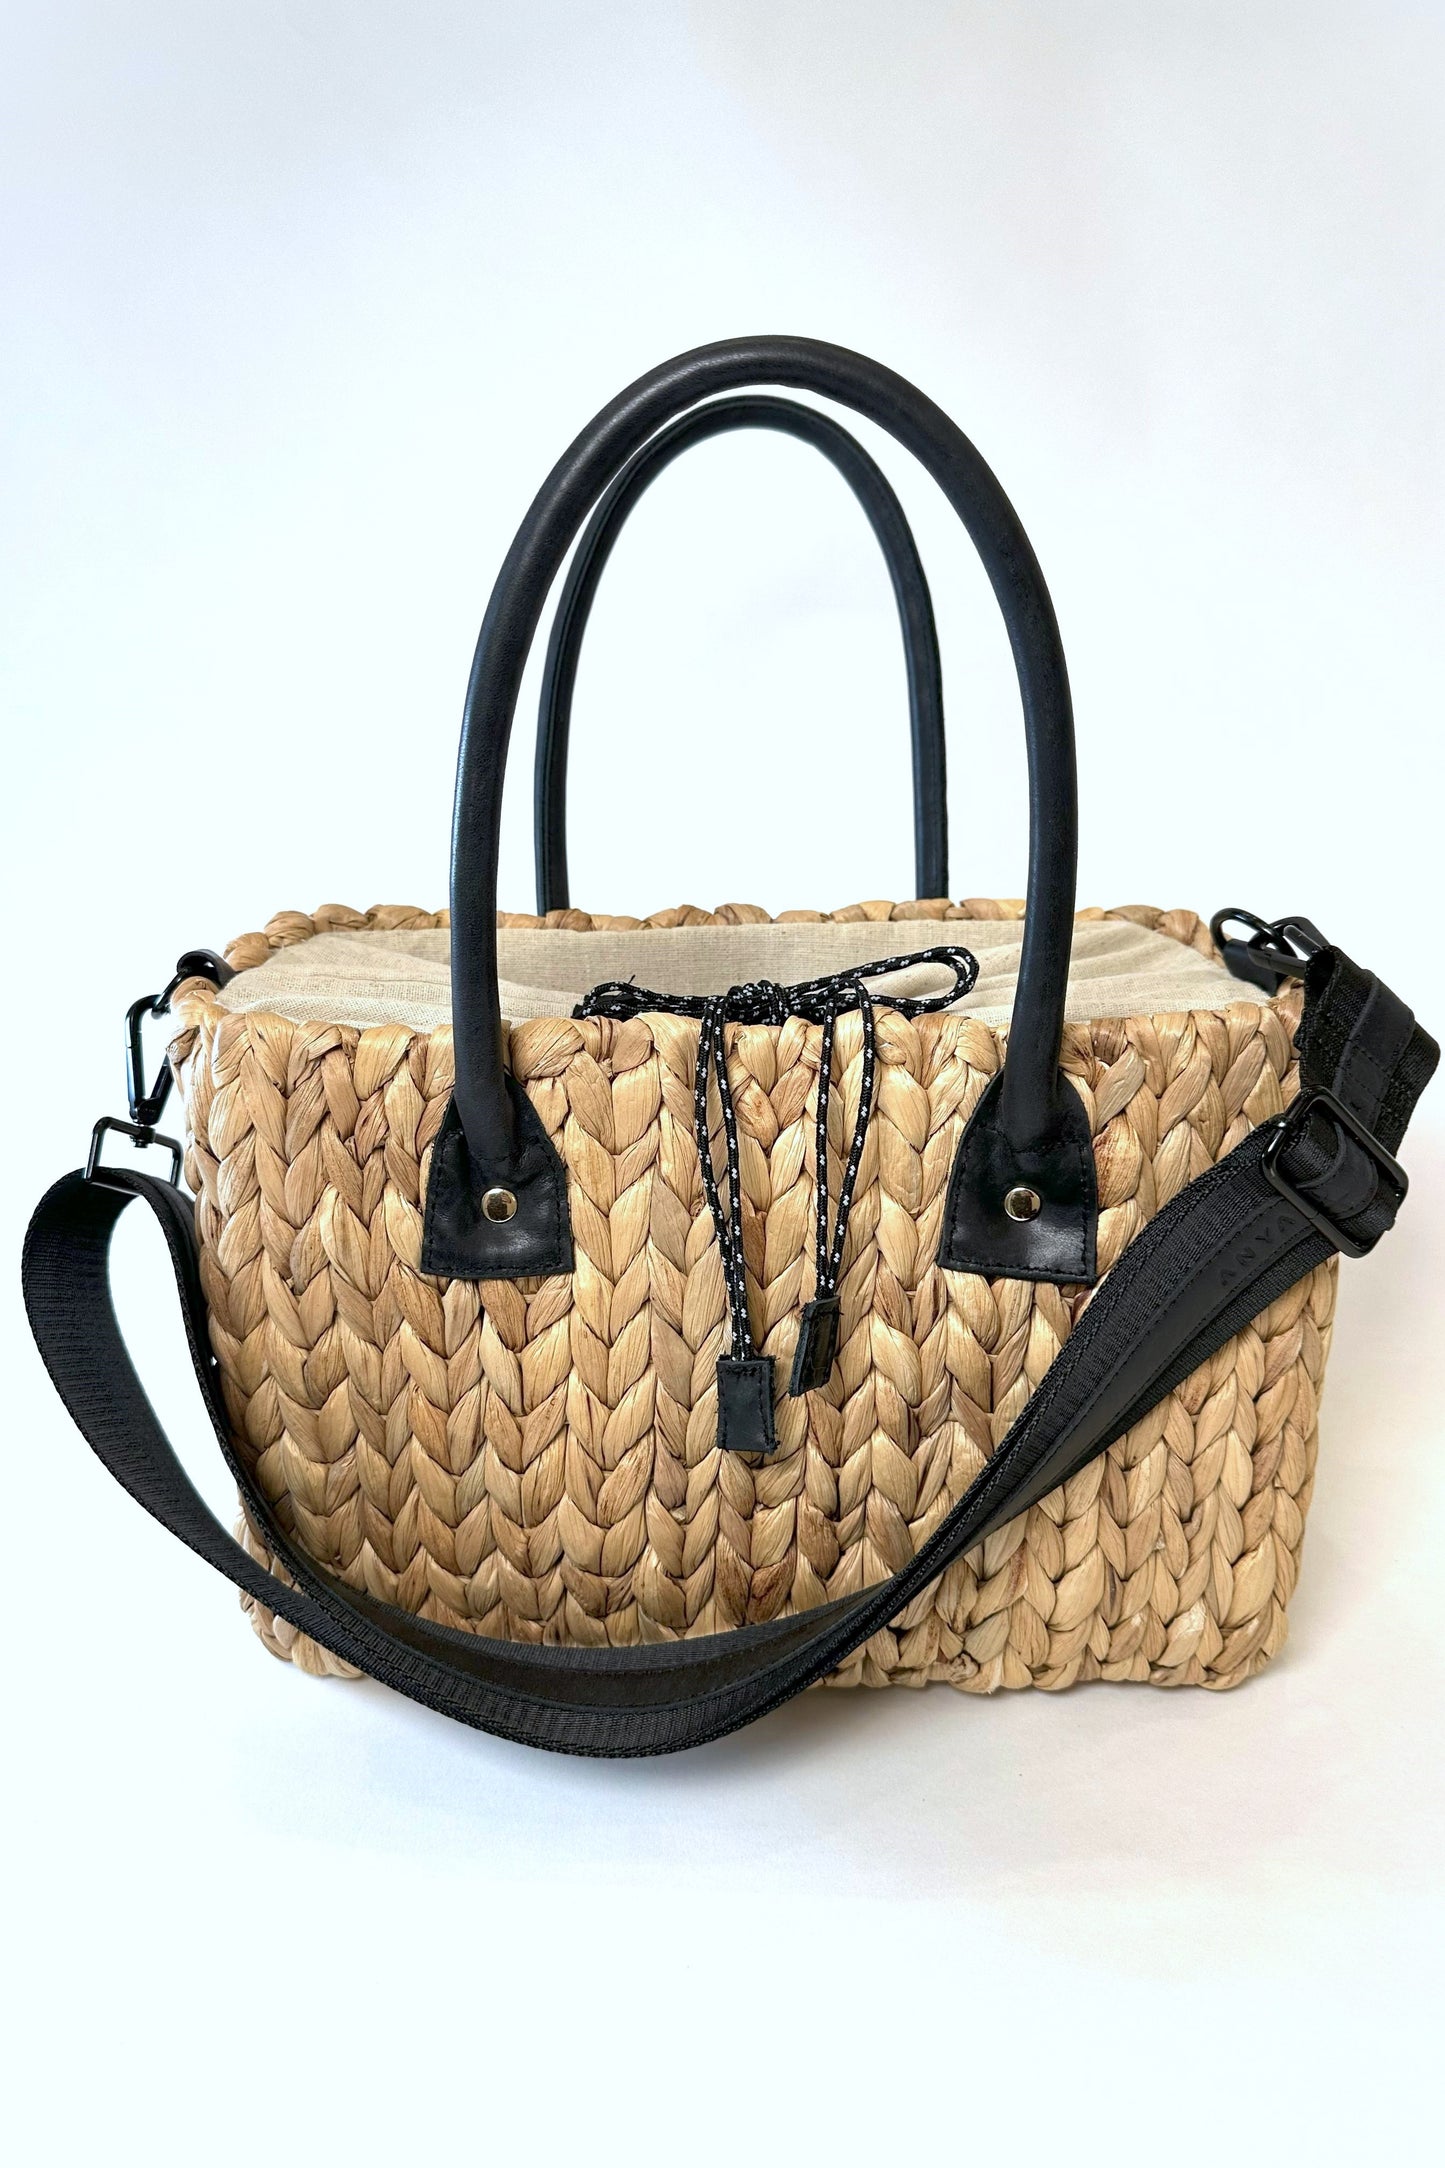 Medium sized hyancinth straw bag with black leather handles and black crossbody strap